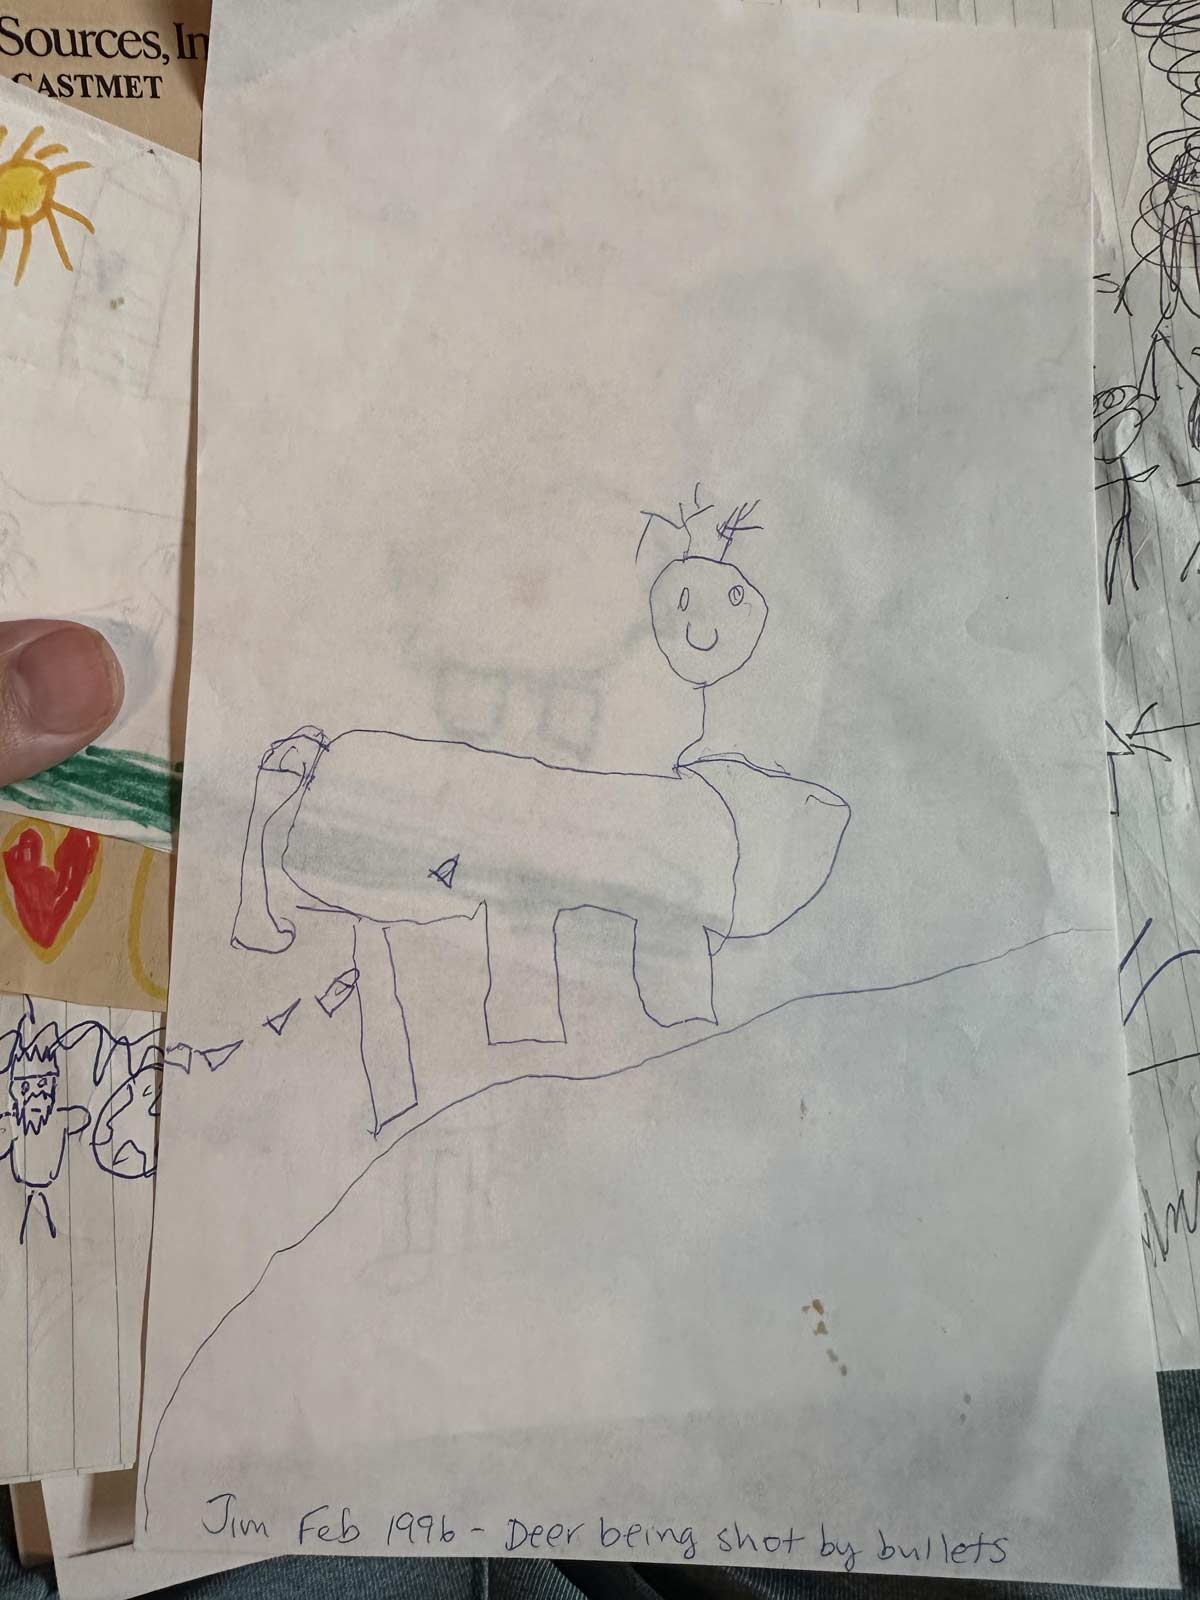 I found my artwork from 1996